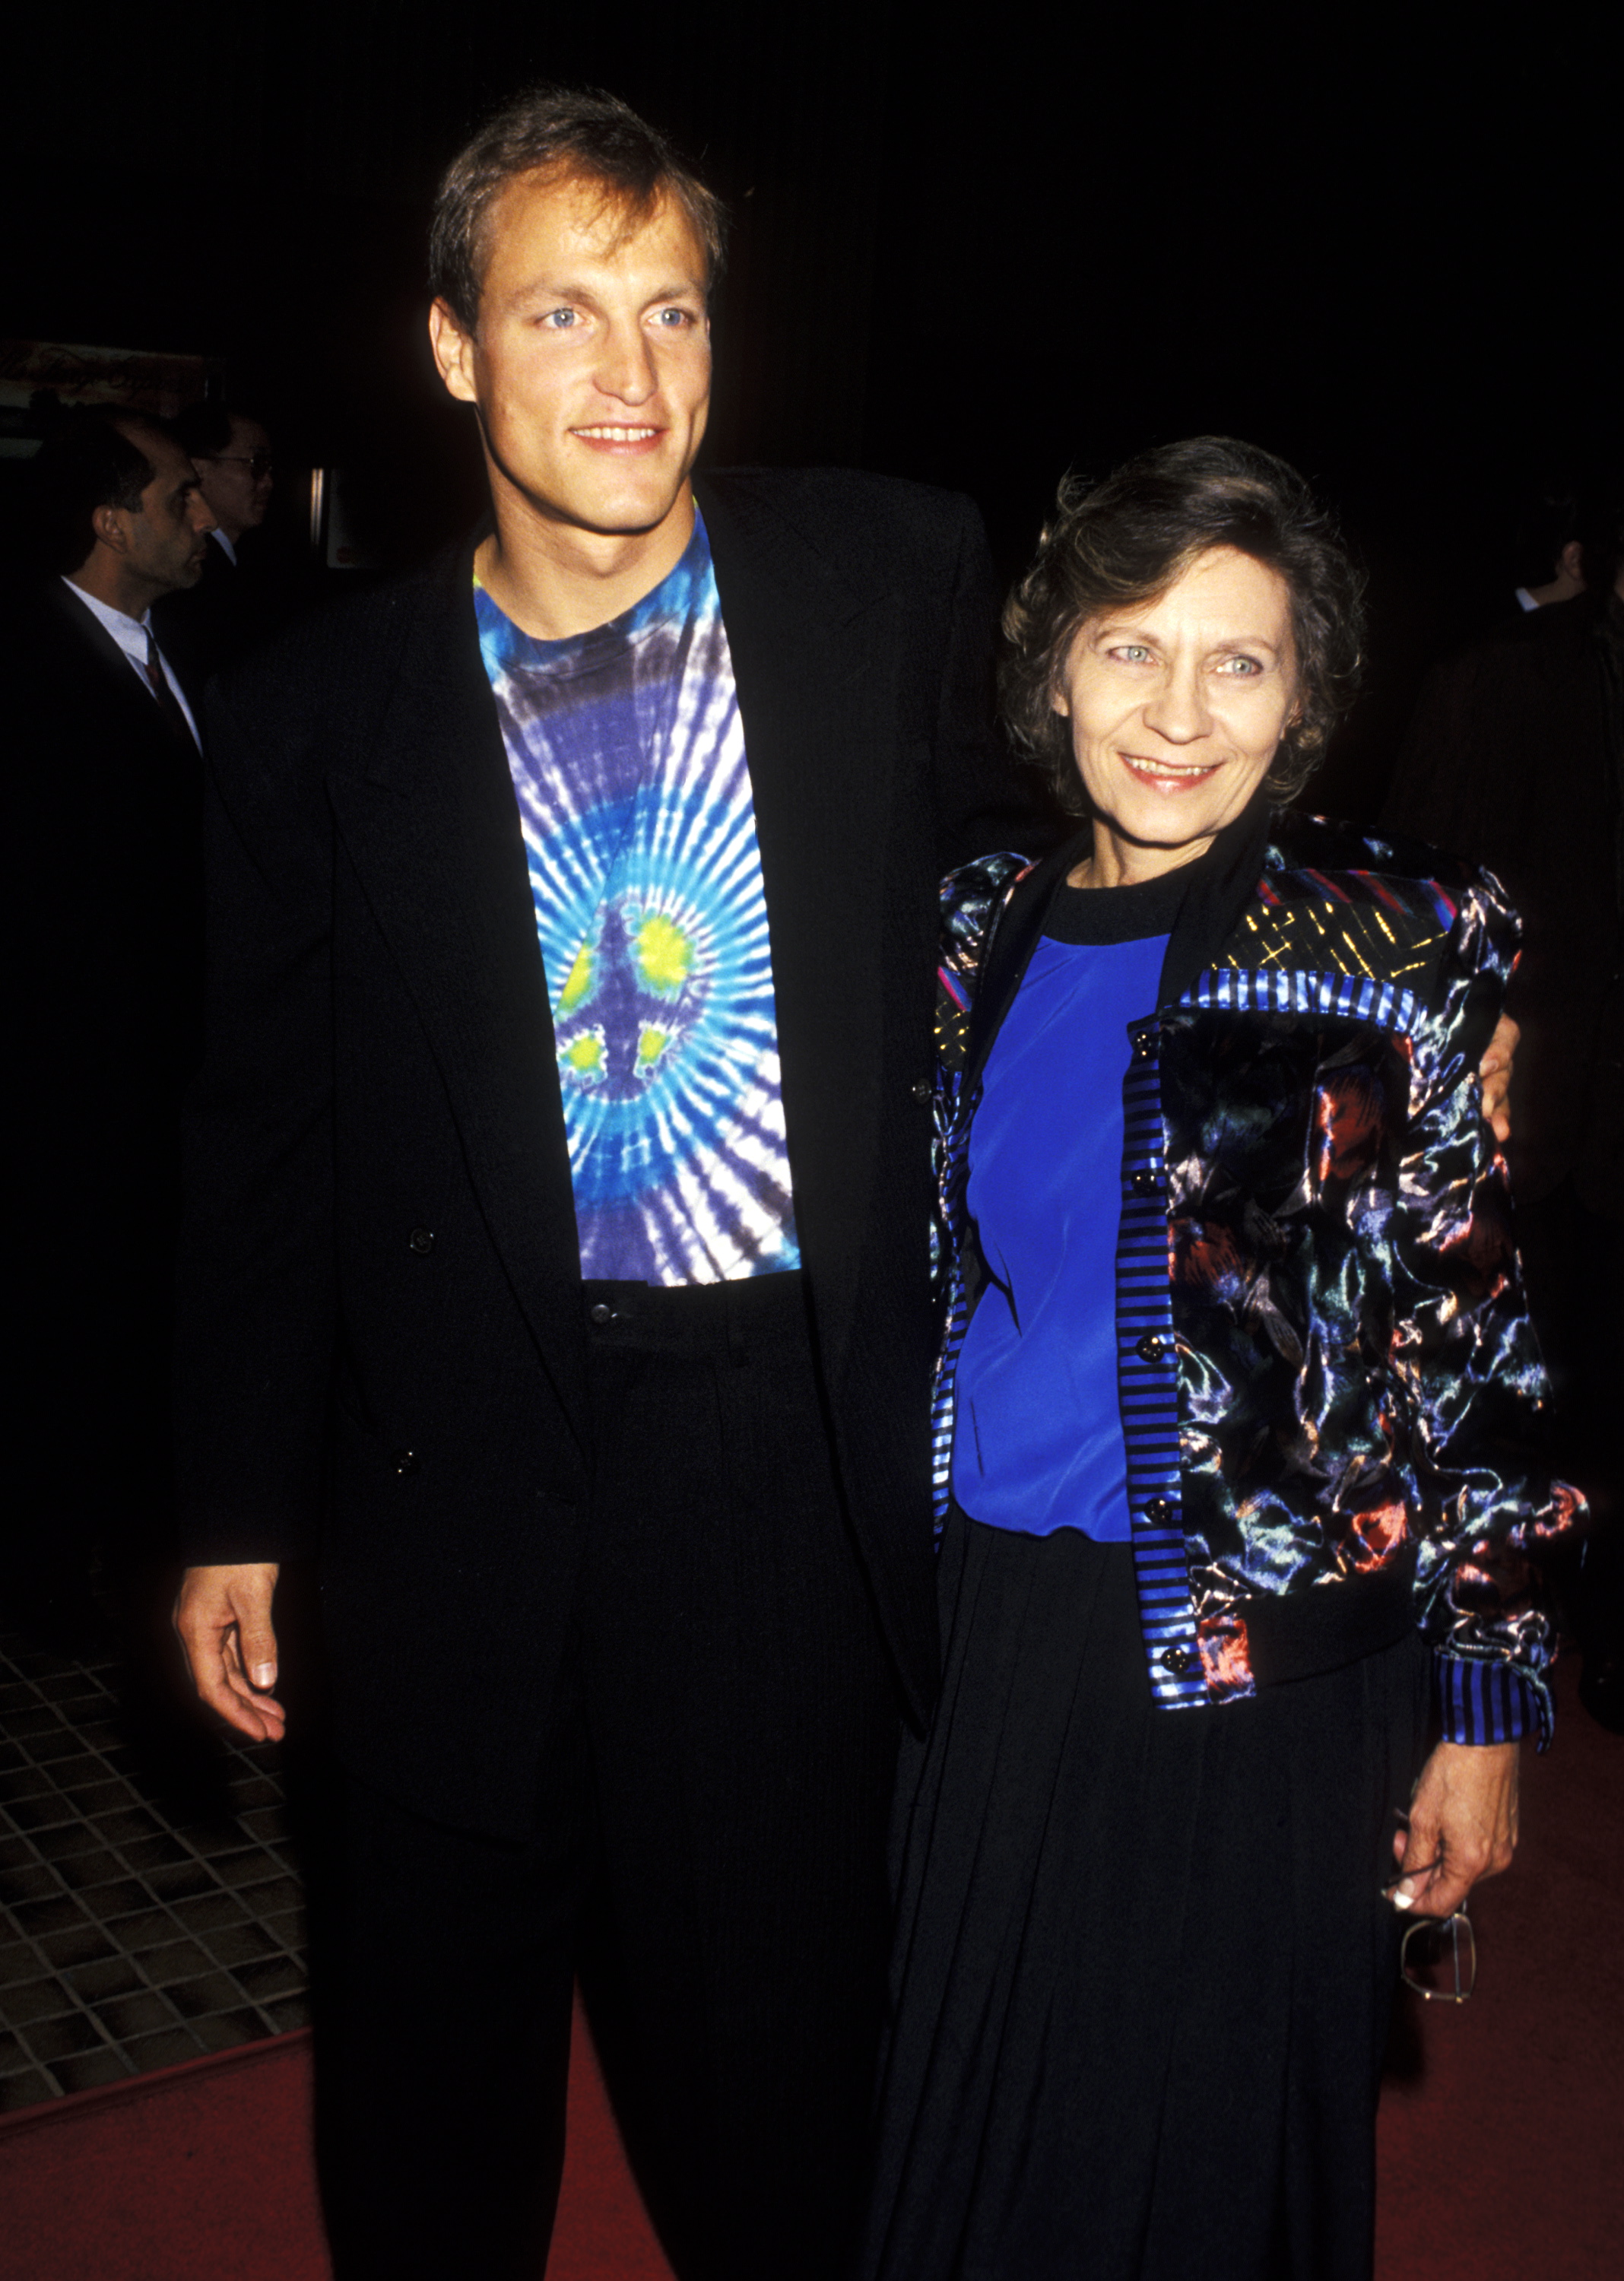 Woody Harrelson and his mother, Dianne Harrelson, at the premiere of "White Men Can't Jump" at Avco Center Cinema in Westwood | Source: Getty Images